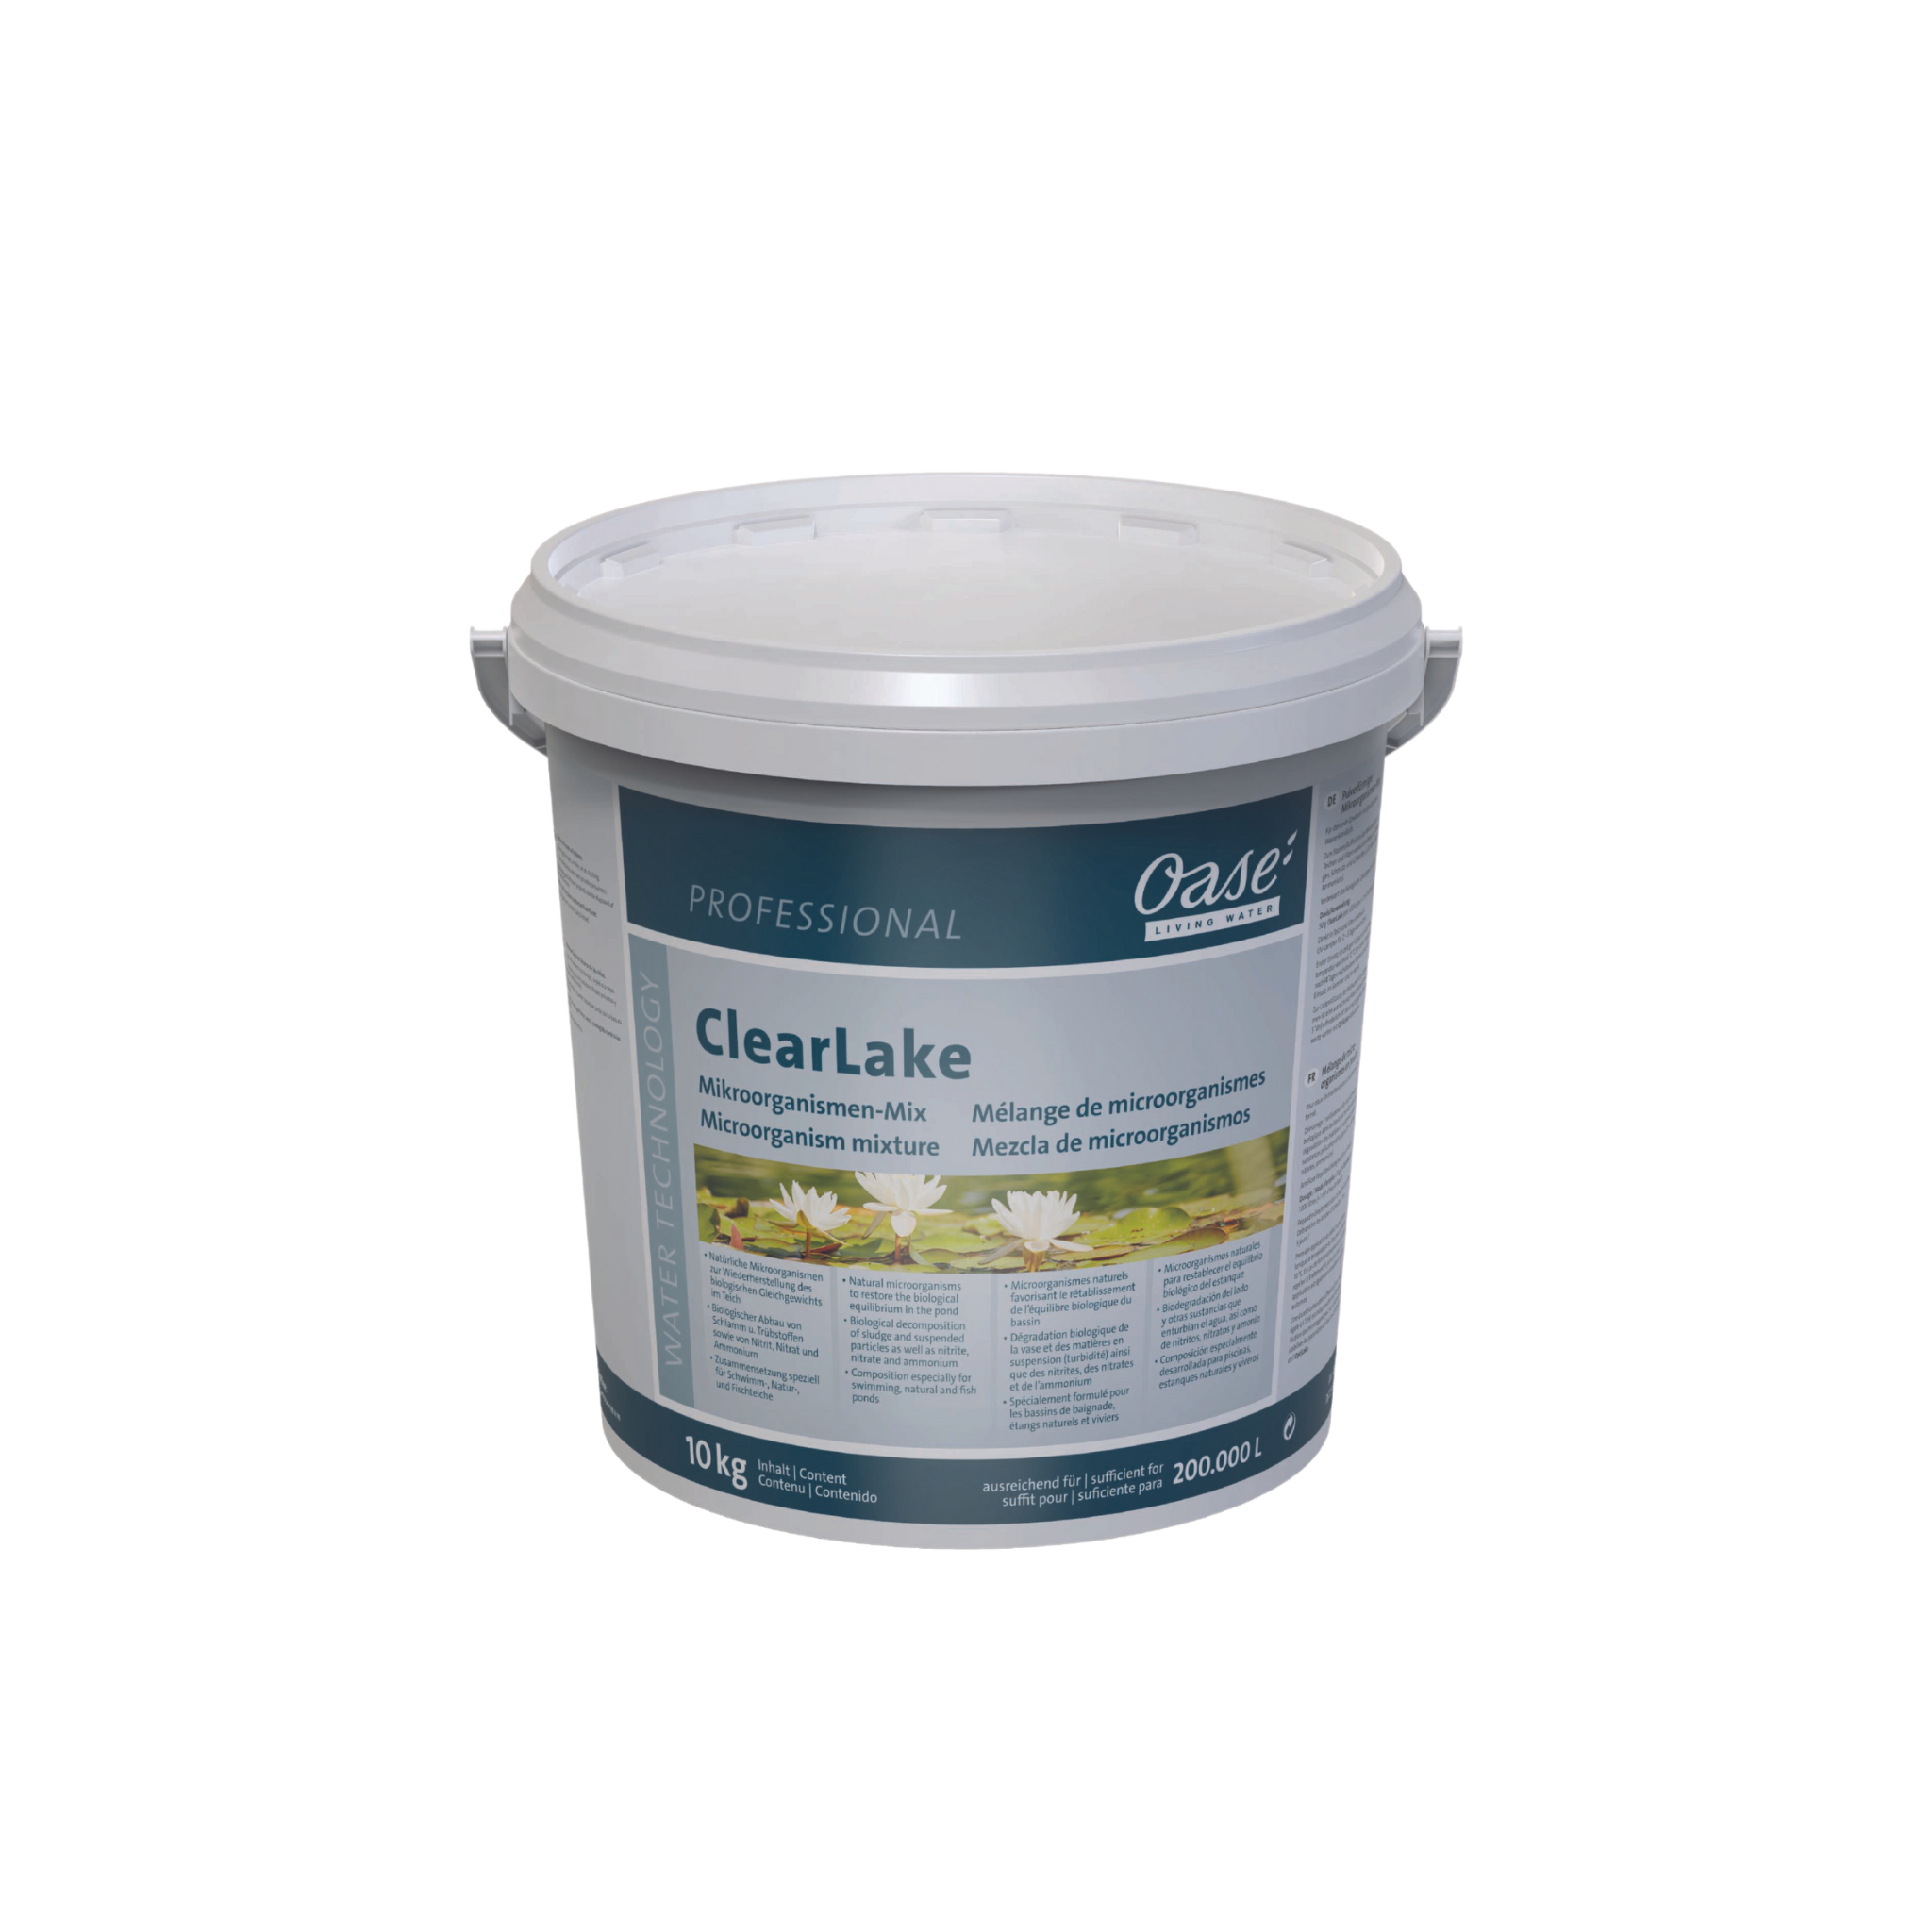 ClearLake by OASE .Captivates and amplifies the bioloical self- purification processRemoves toxins and counteracts putrefaction